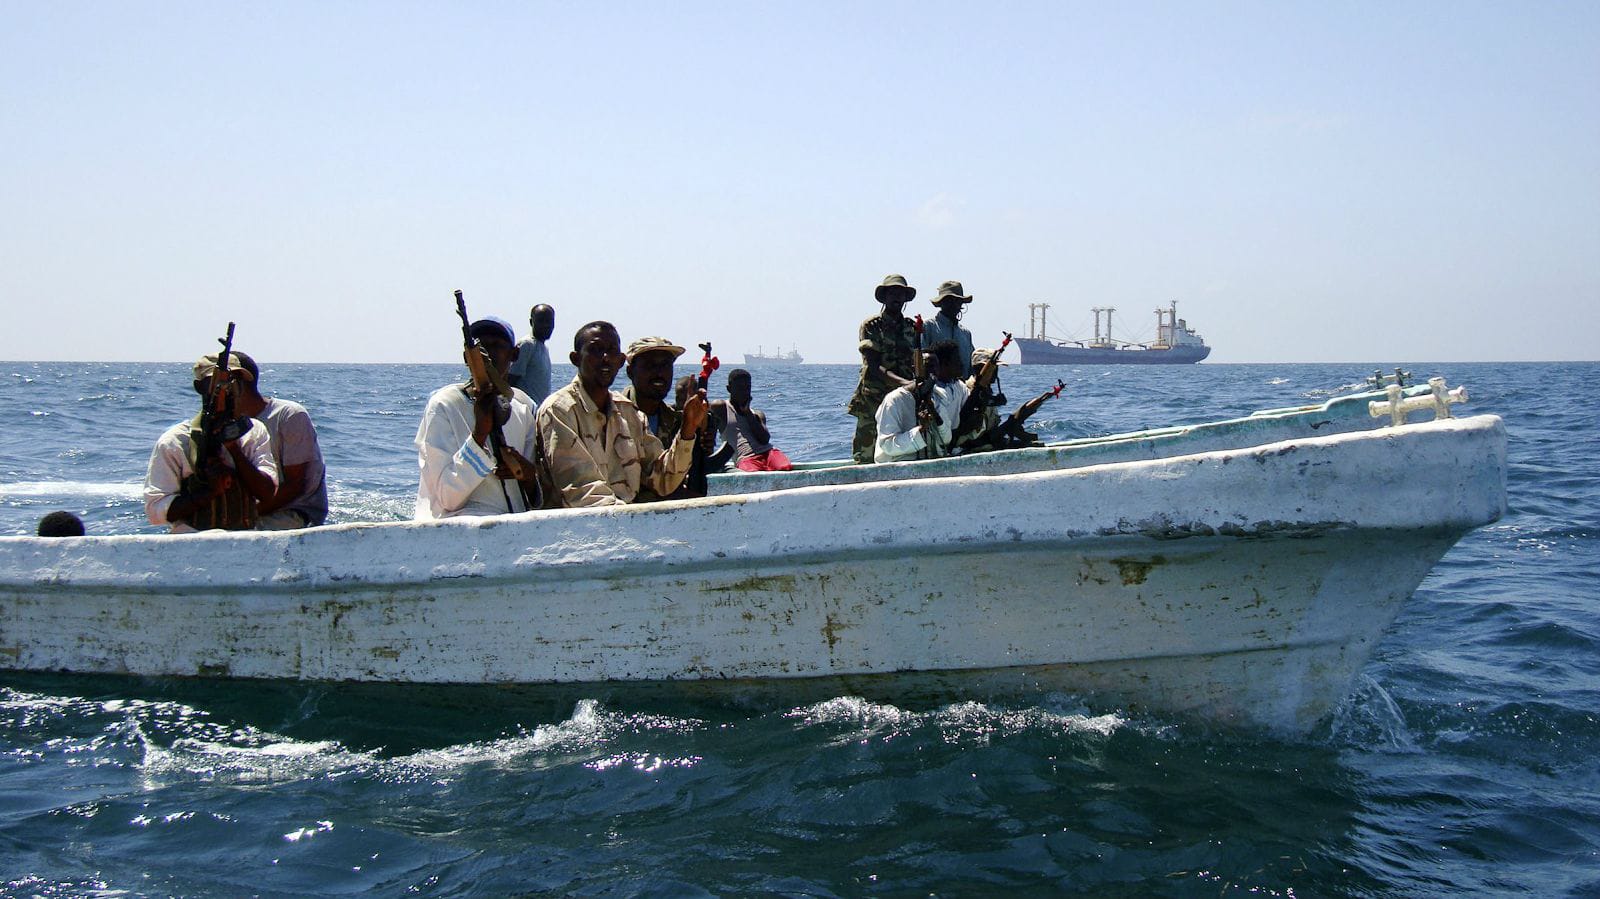 Is climate change a major contributor to maritime piracy?